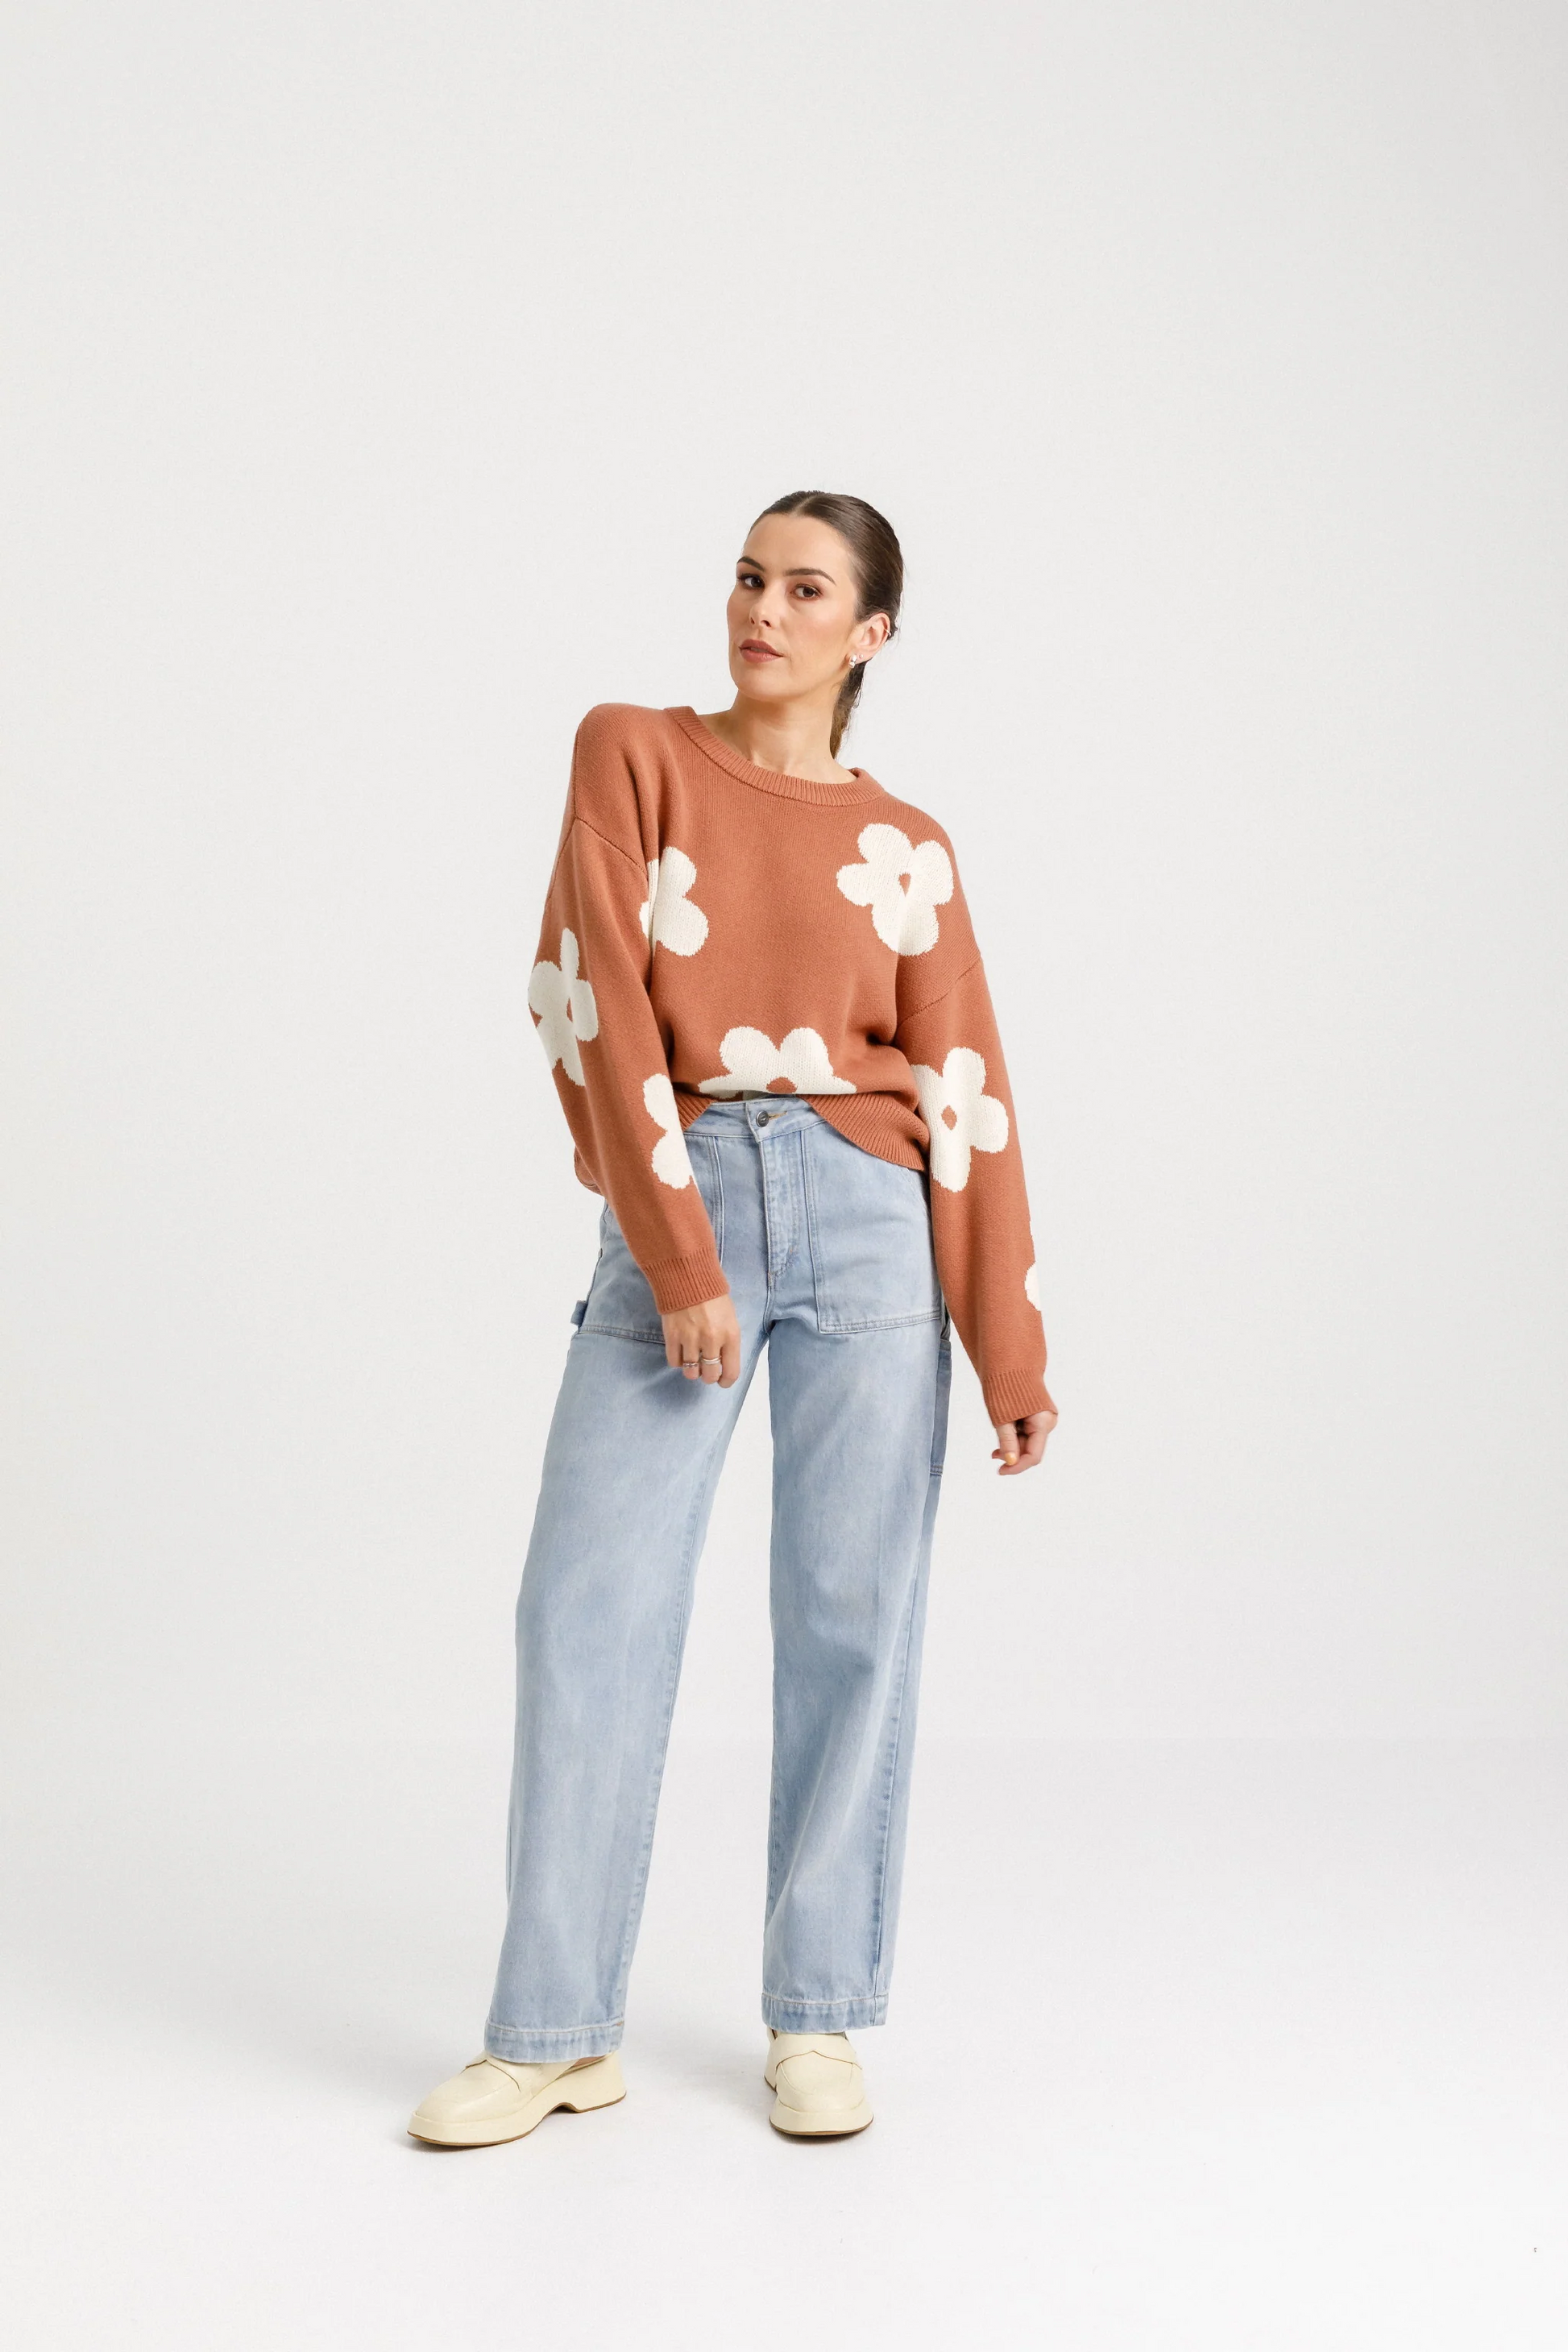 THING THING BLOOM JUMPER - AUTUMNAL - THE VOGUE STORE